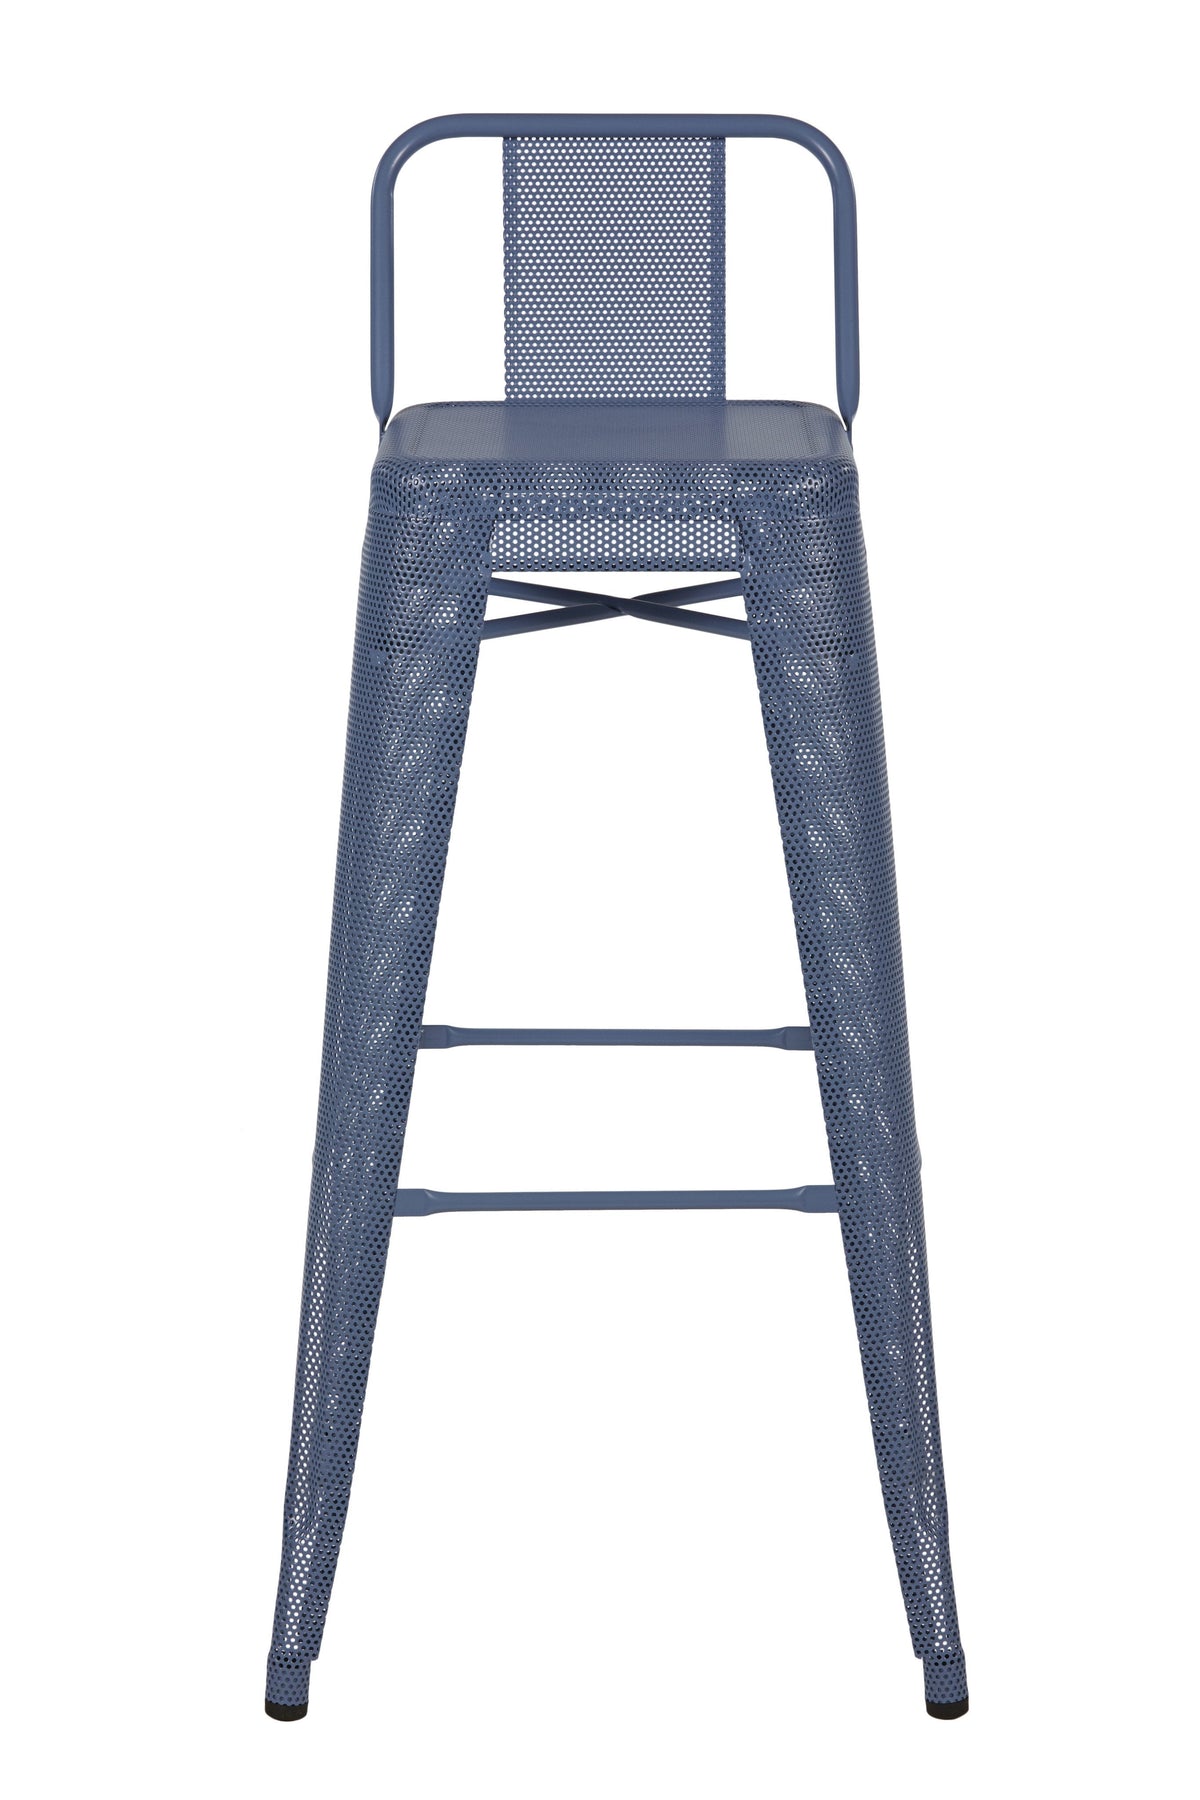 Perforated HPD High Stool-Tolix-Contract Furniture Store